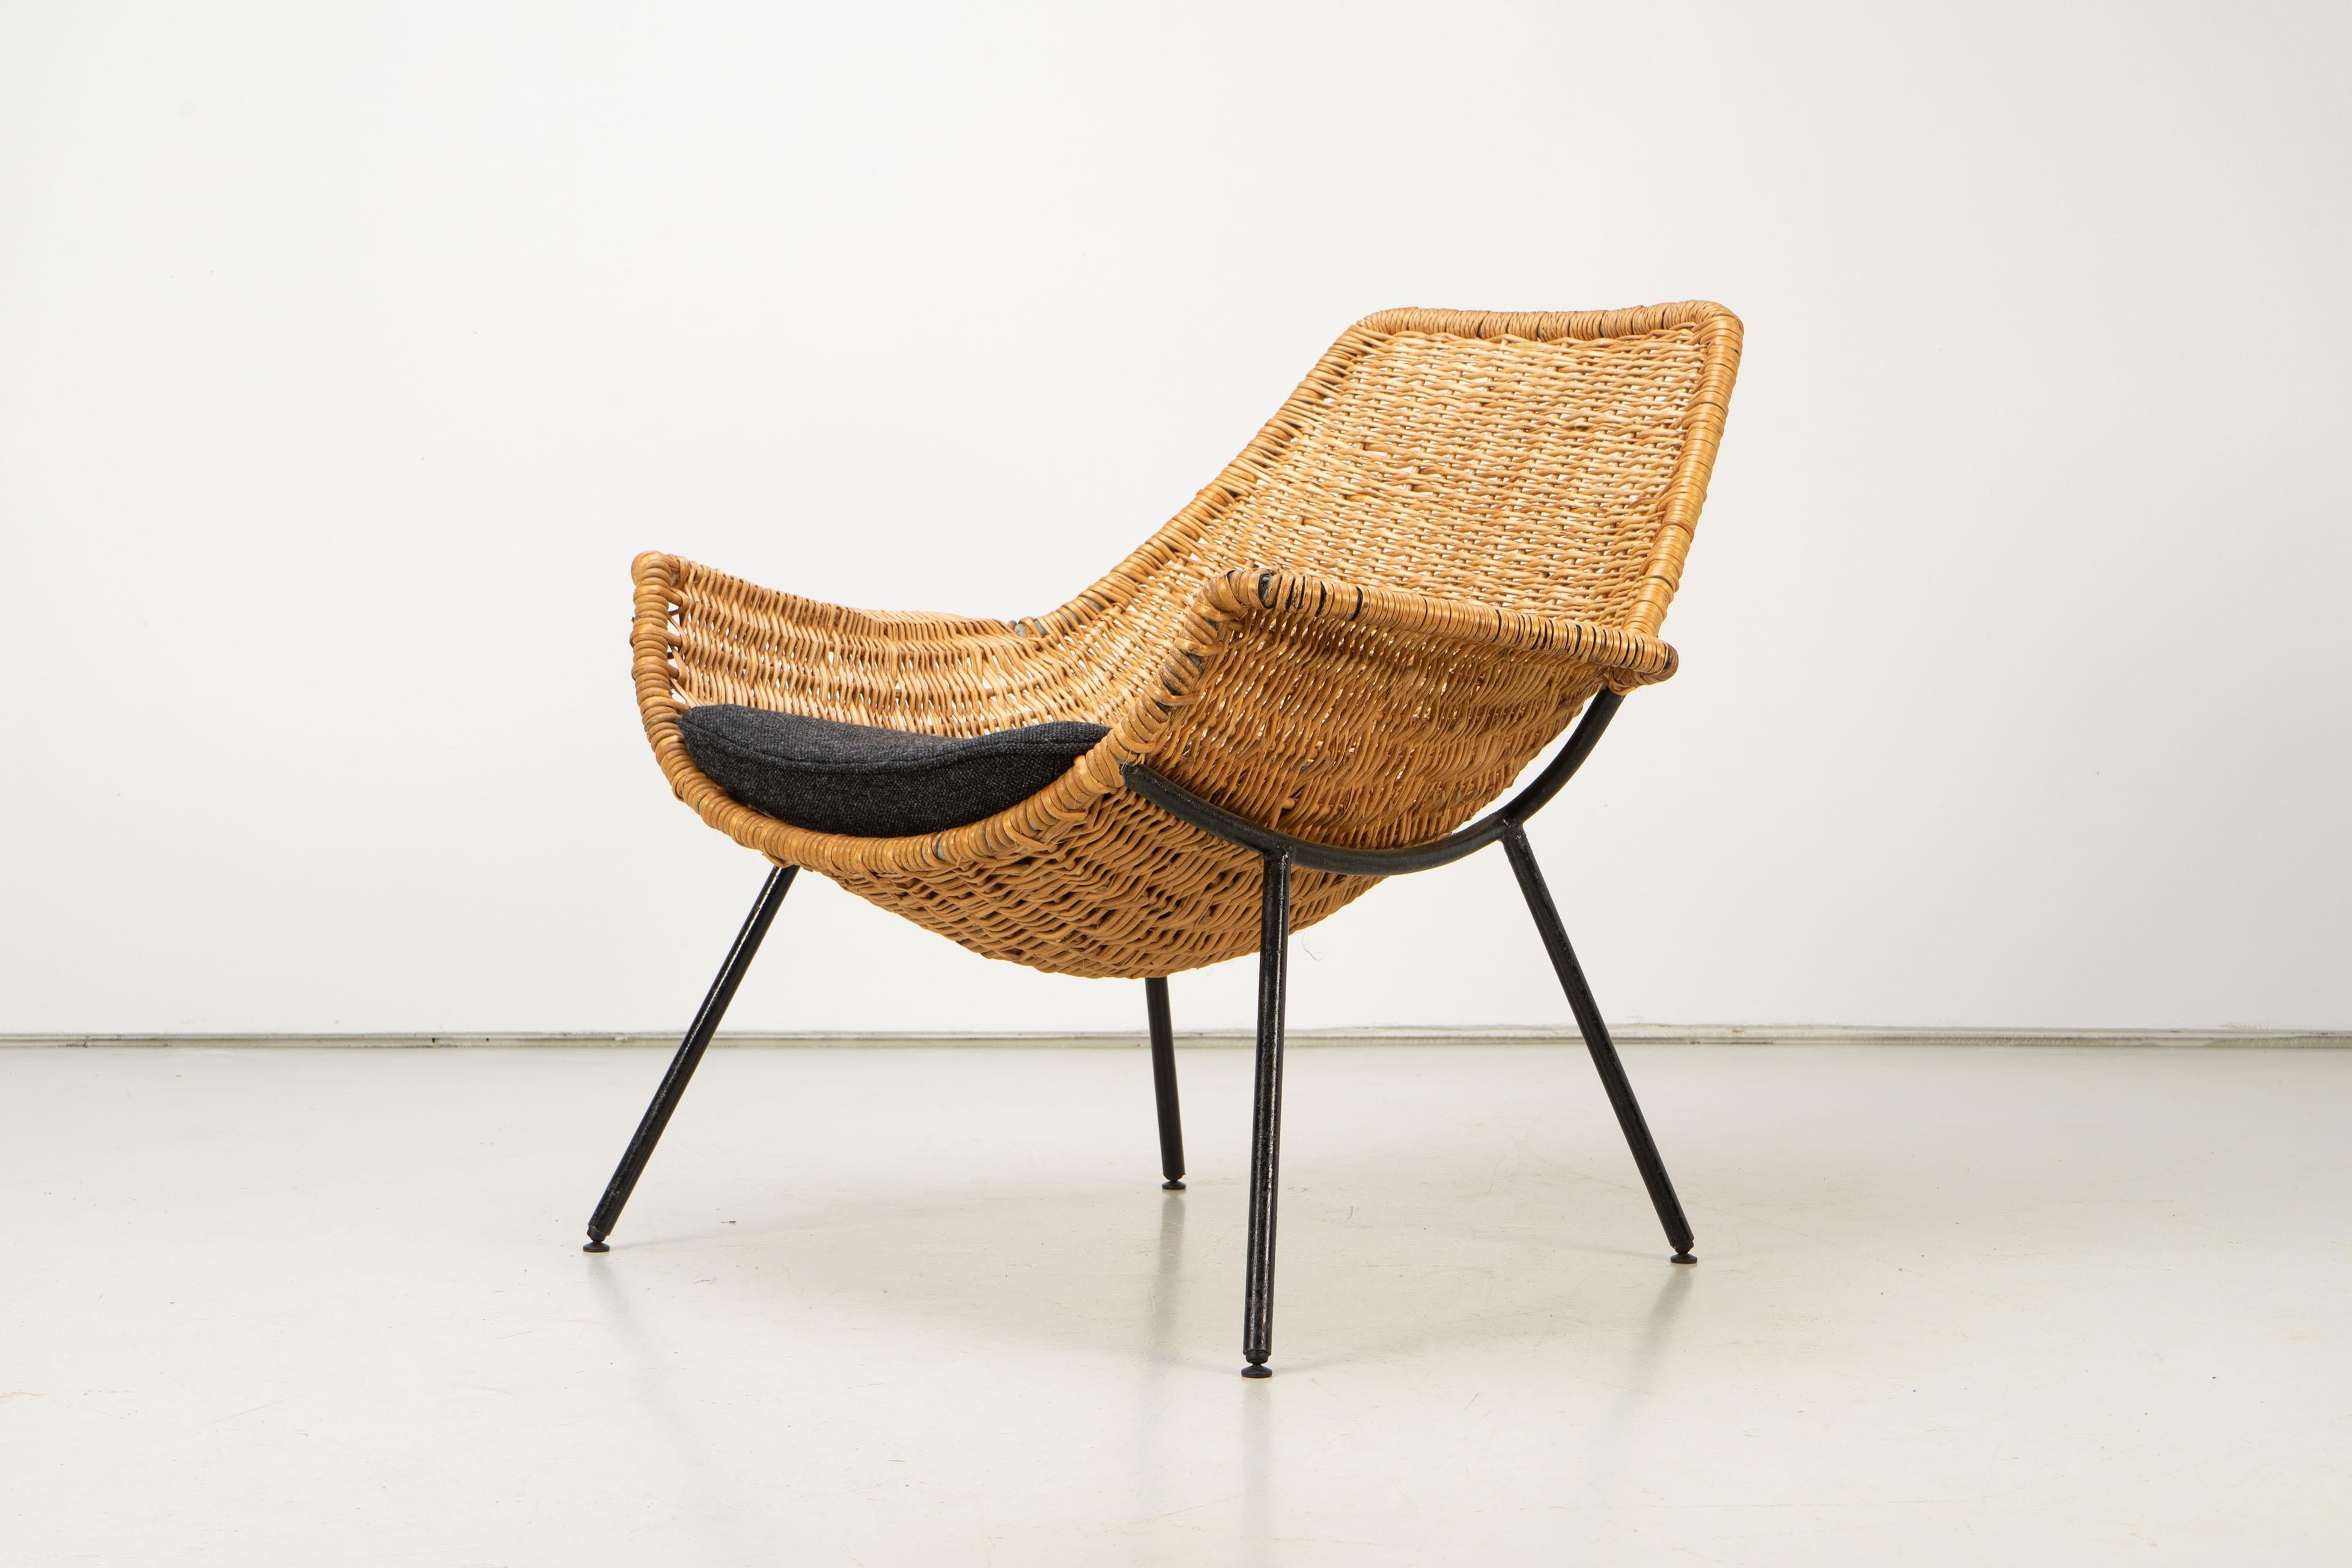 Rare lounge chair model by the well-known architect Giancarlo De Carlo. The design was part of a shop fitting that De Carlo and Massimo Vignelli implemented in Bari in 1954. Very good condition with age-appropriate signs of use.
 